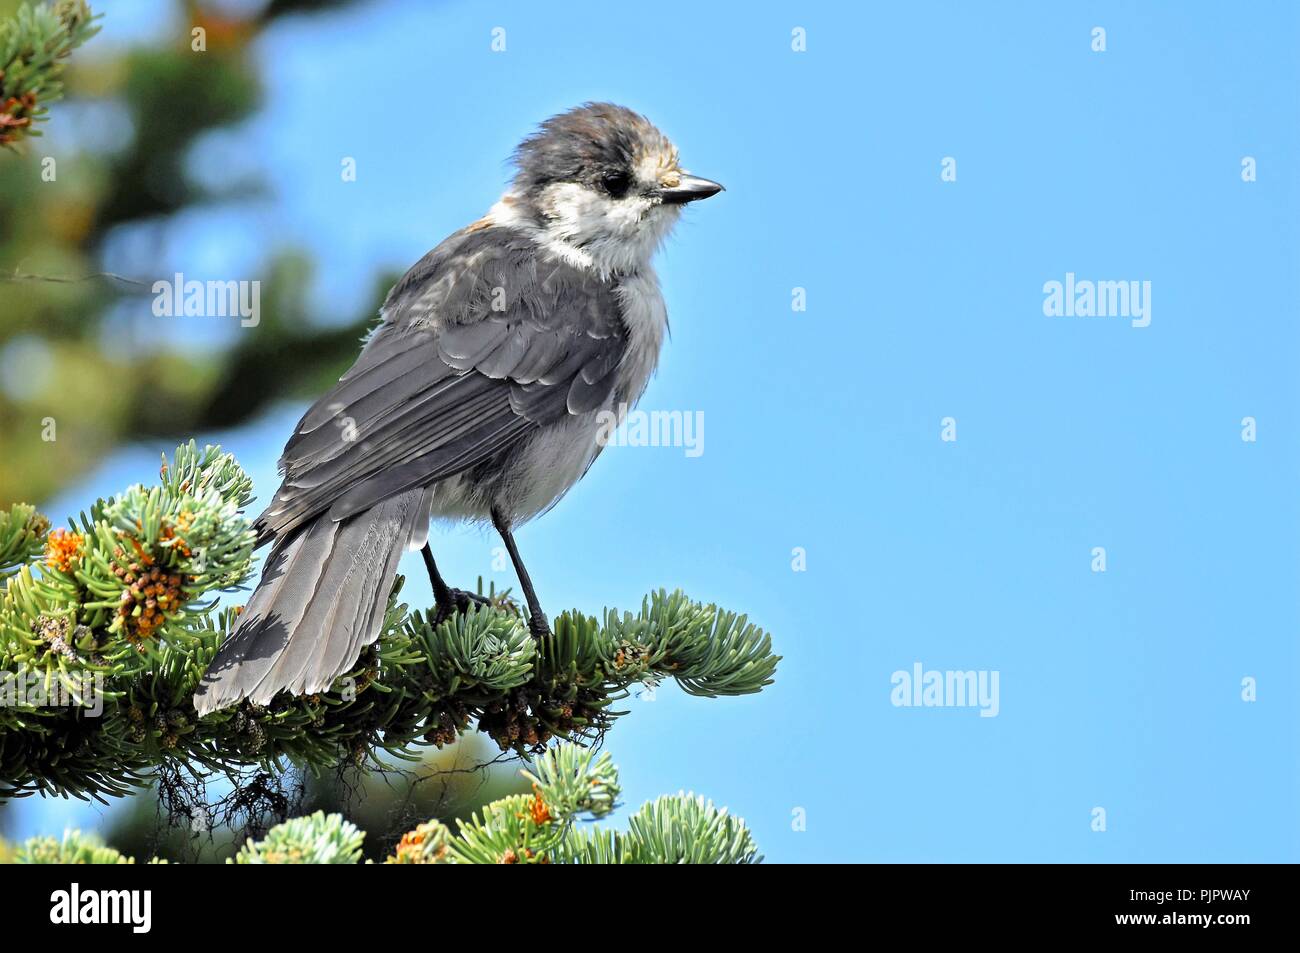 Whisky Jack perched on a fir tree in Whistler mountains. Stock Photo